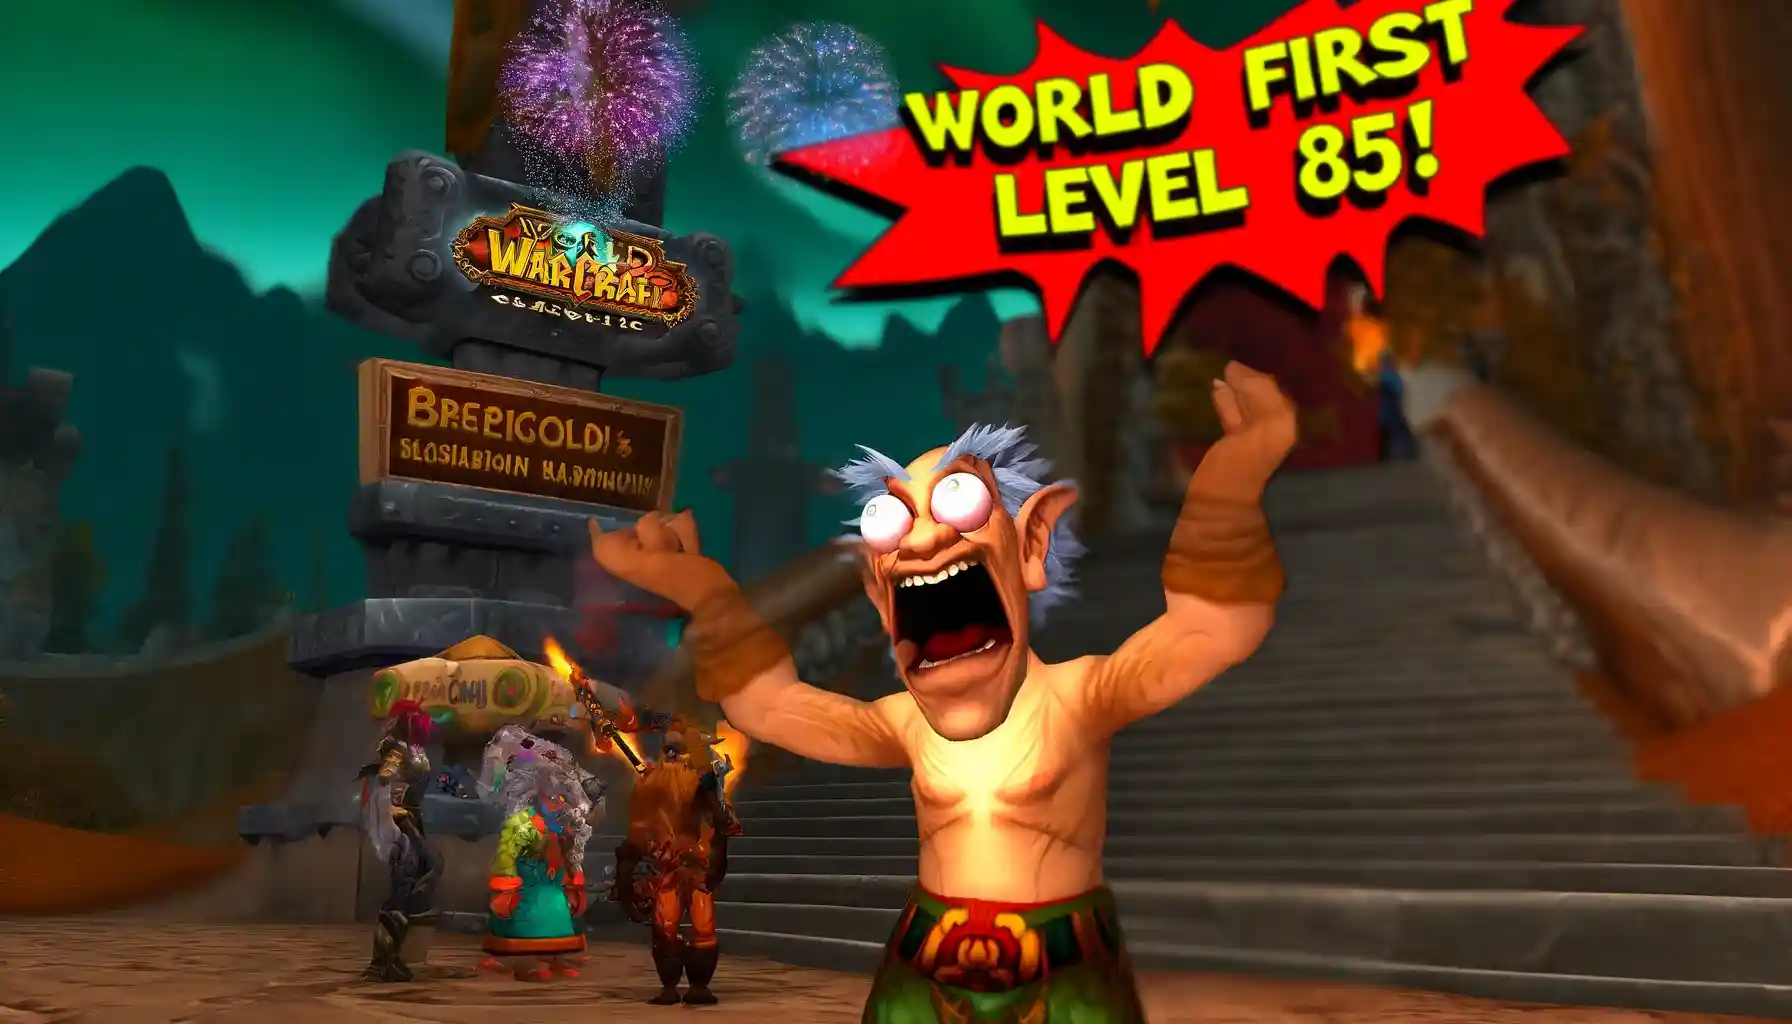 Cataclysm Classic World First Level 85 Achieved By Lmgd1 In Under 3 Hours